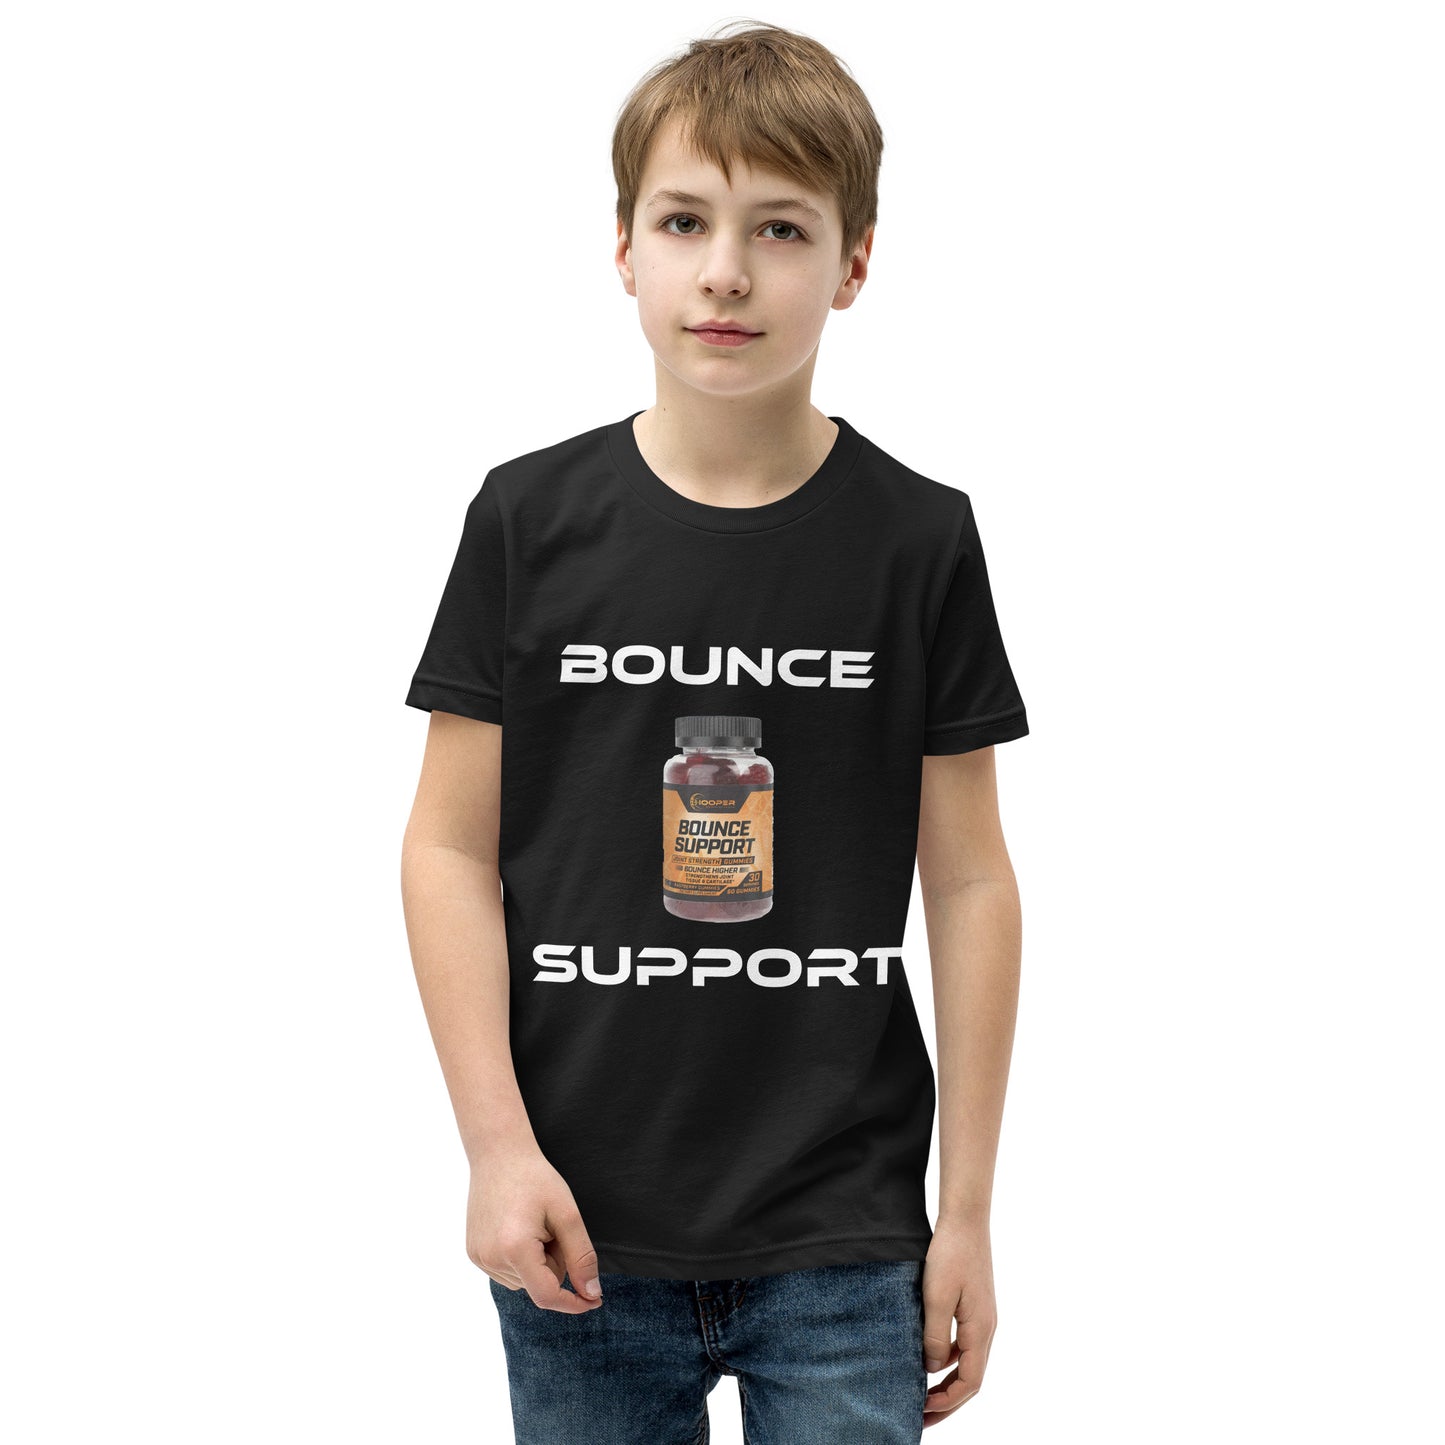 Bounce Support Youth Short Sleeve T-Shirt-Fashionable and Cozy Kids' Tee